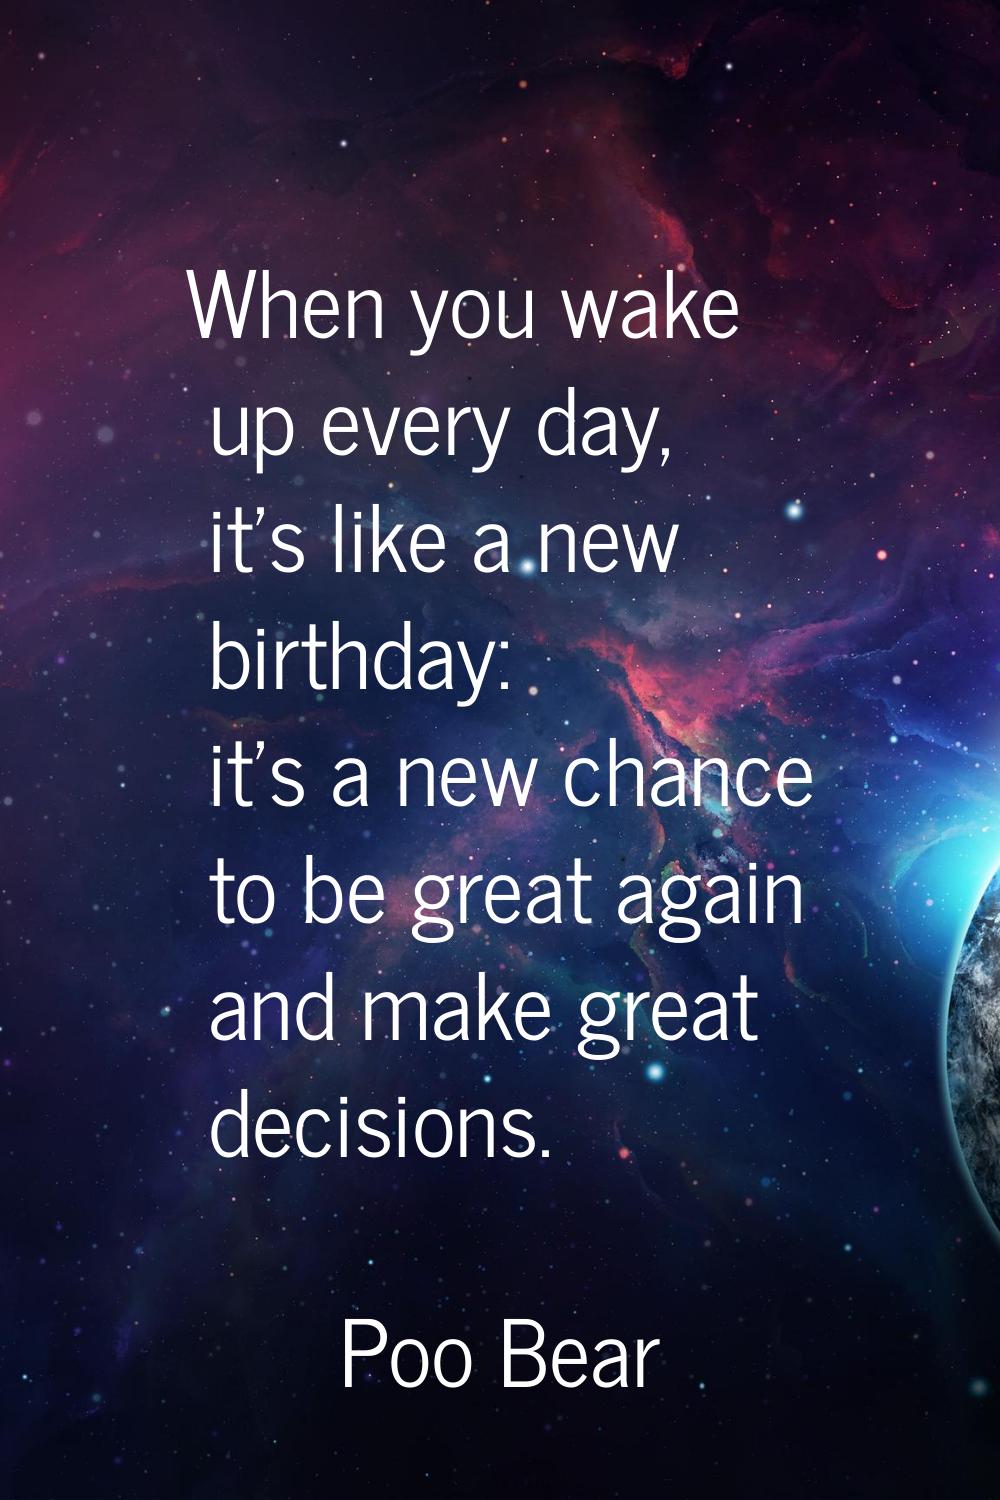 When you wake up every day, it's like a new birthday: it's a new chance to be great again and make 